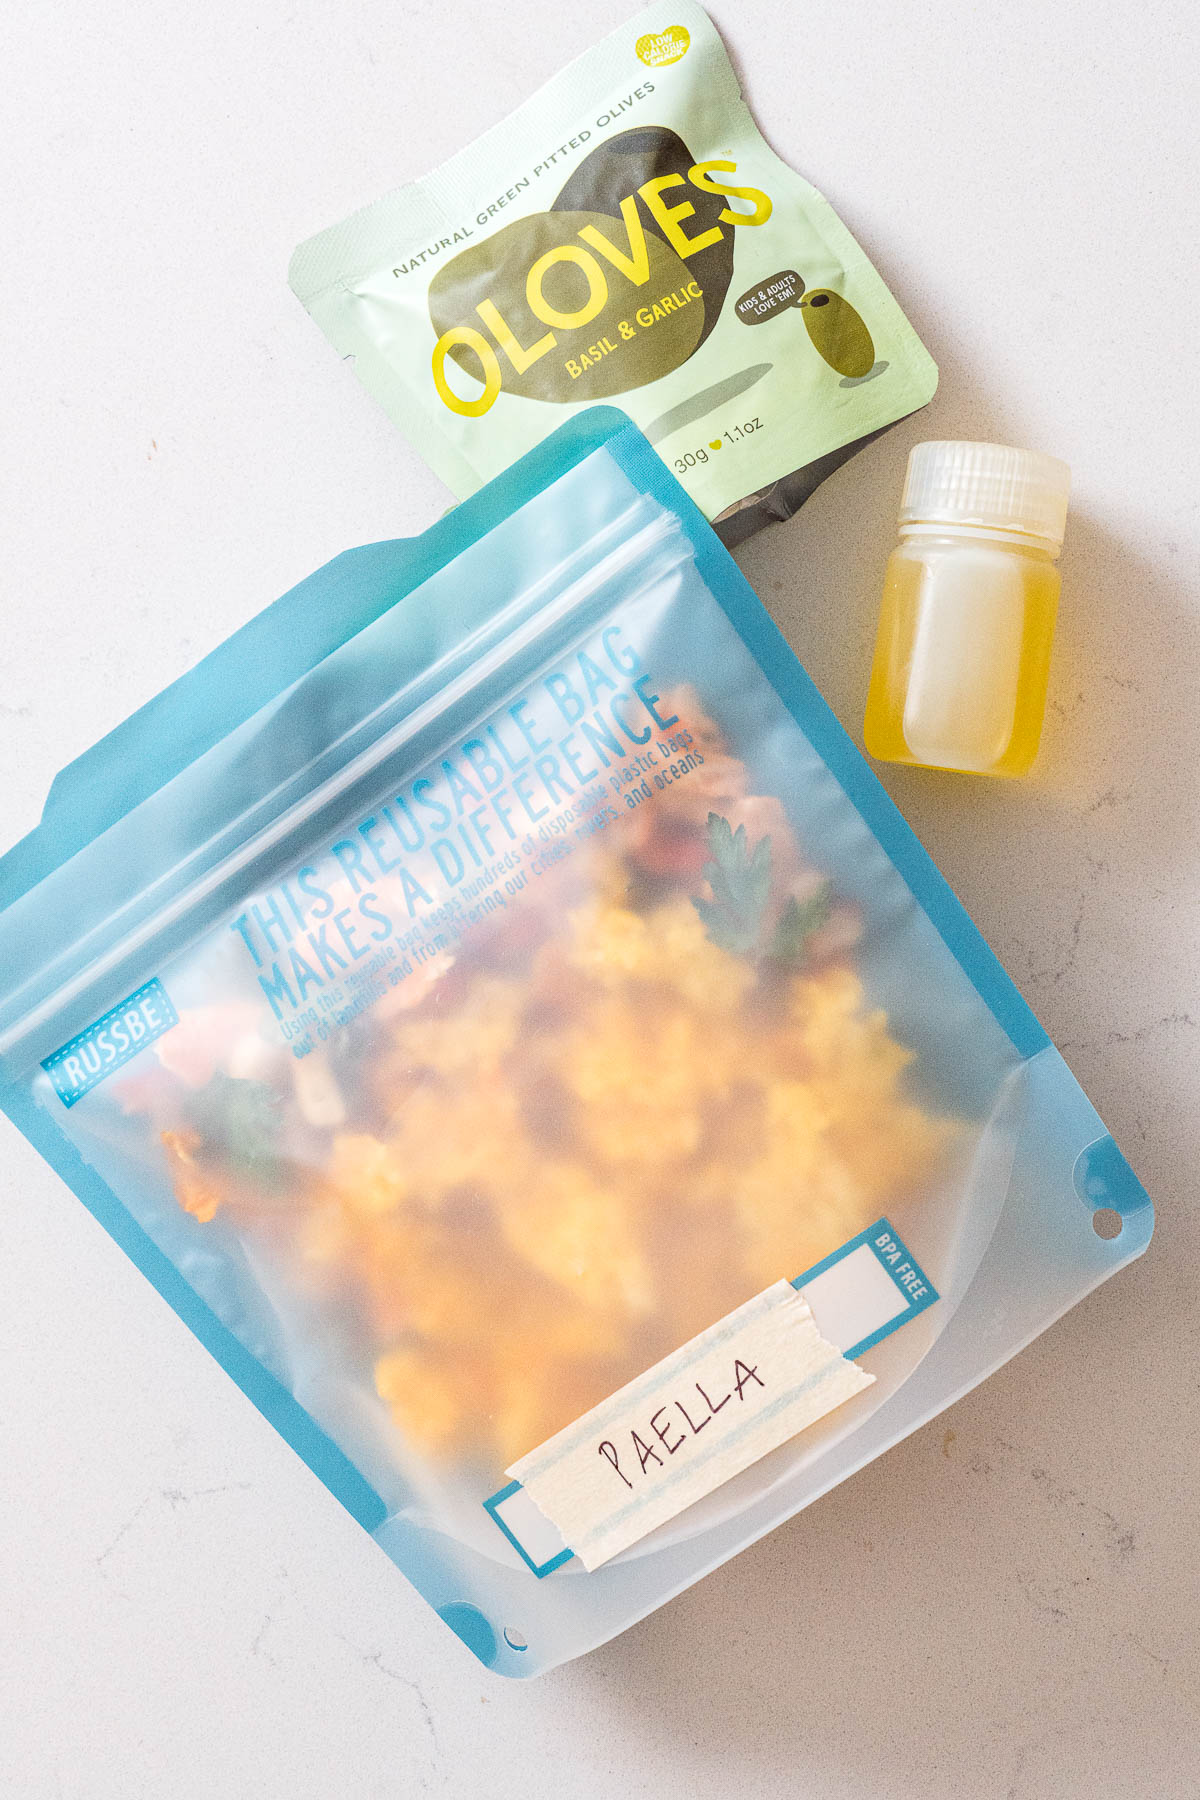 Paella packaged in a baggie for backpacking